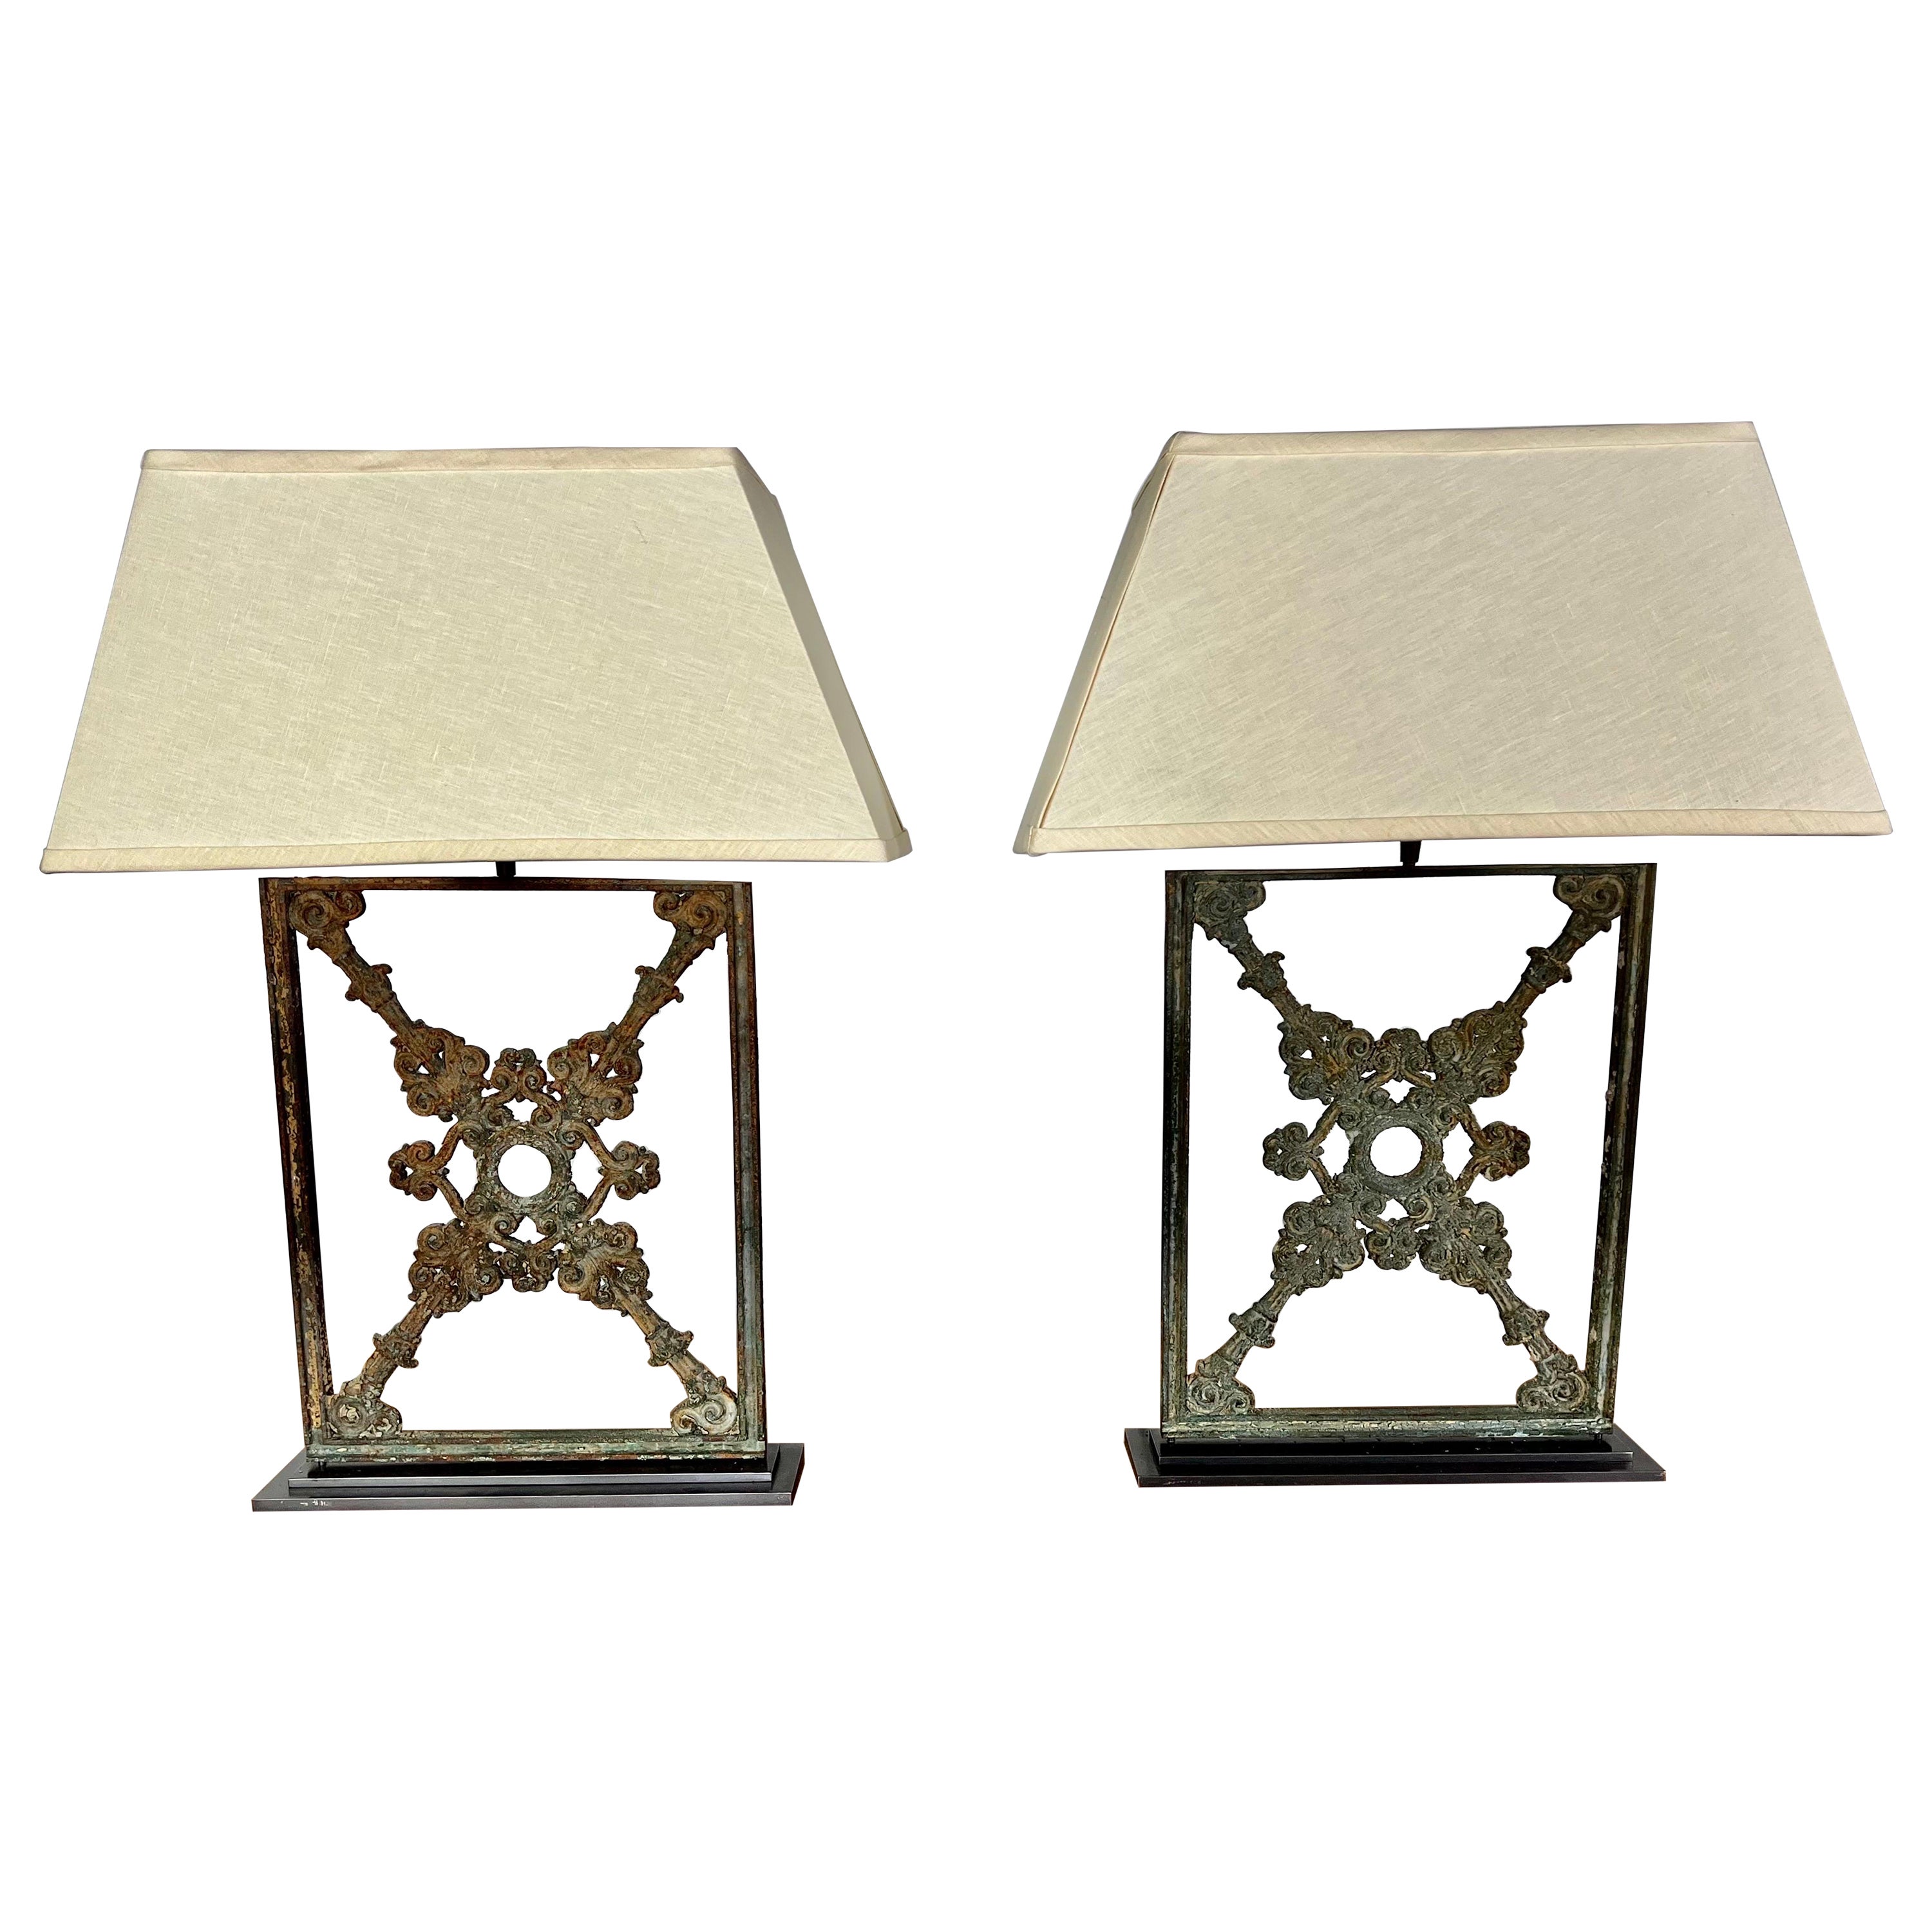 Pair of Wrought Iron Lamps with Linen Shades